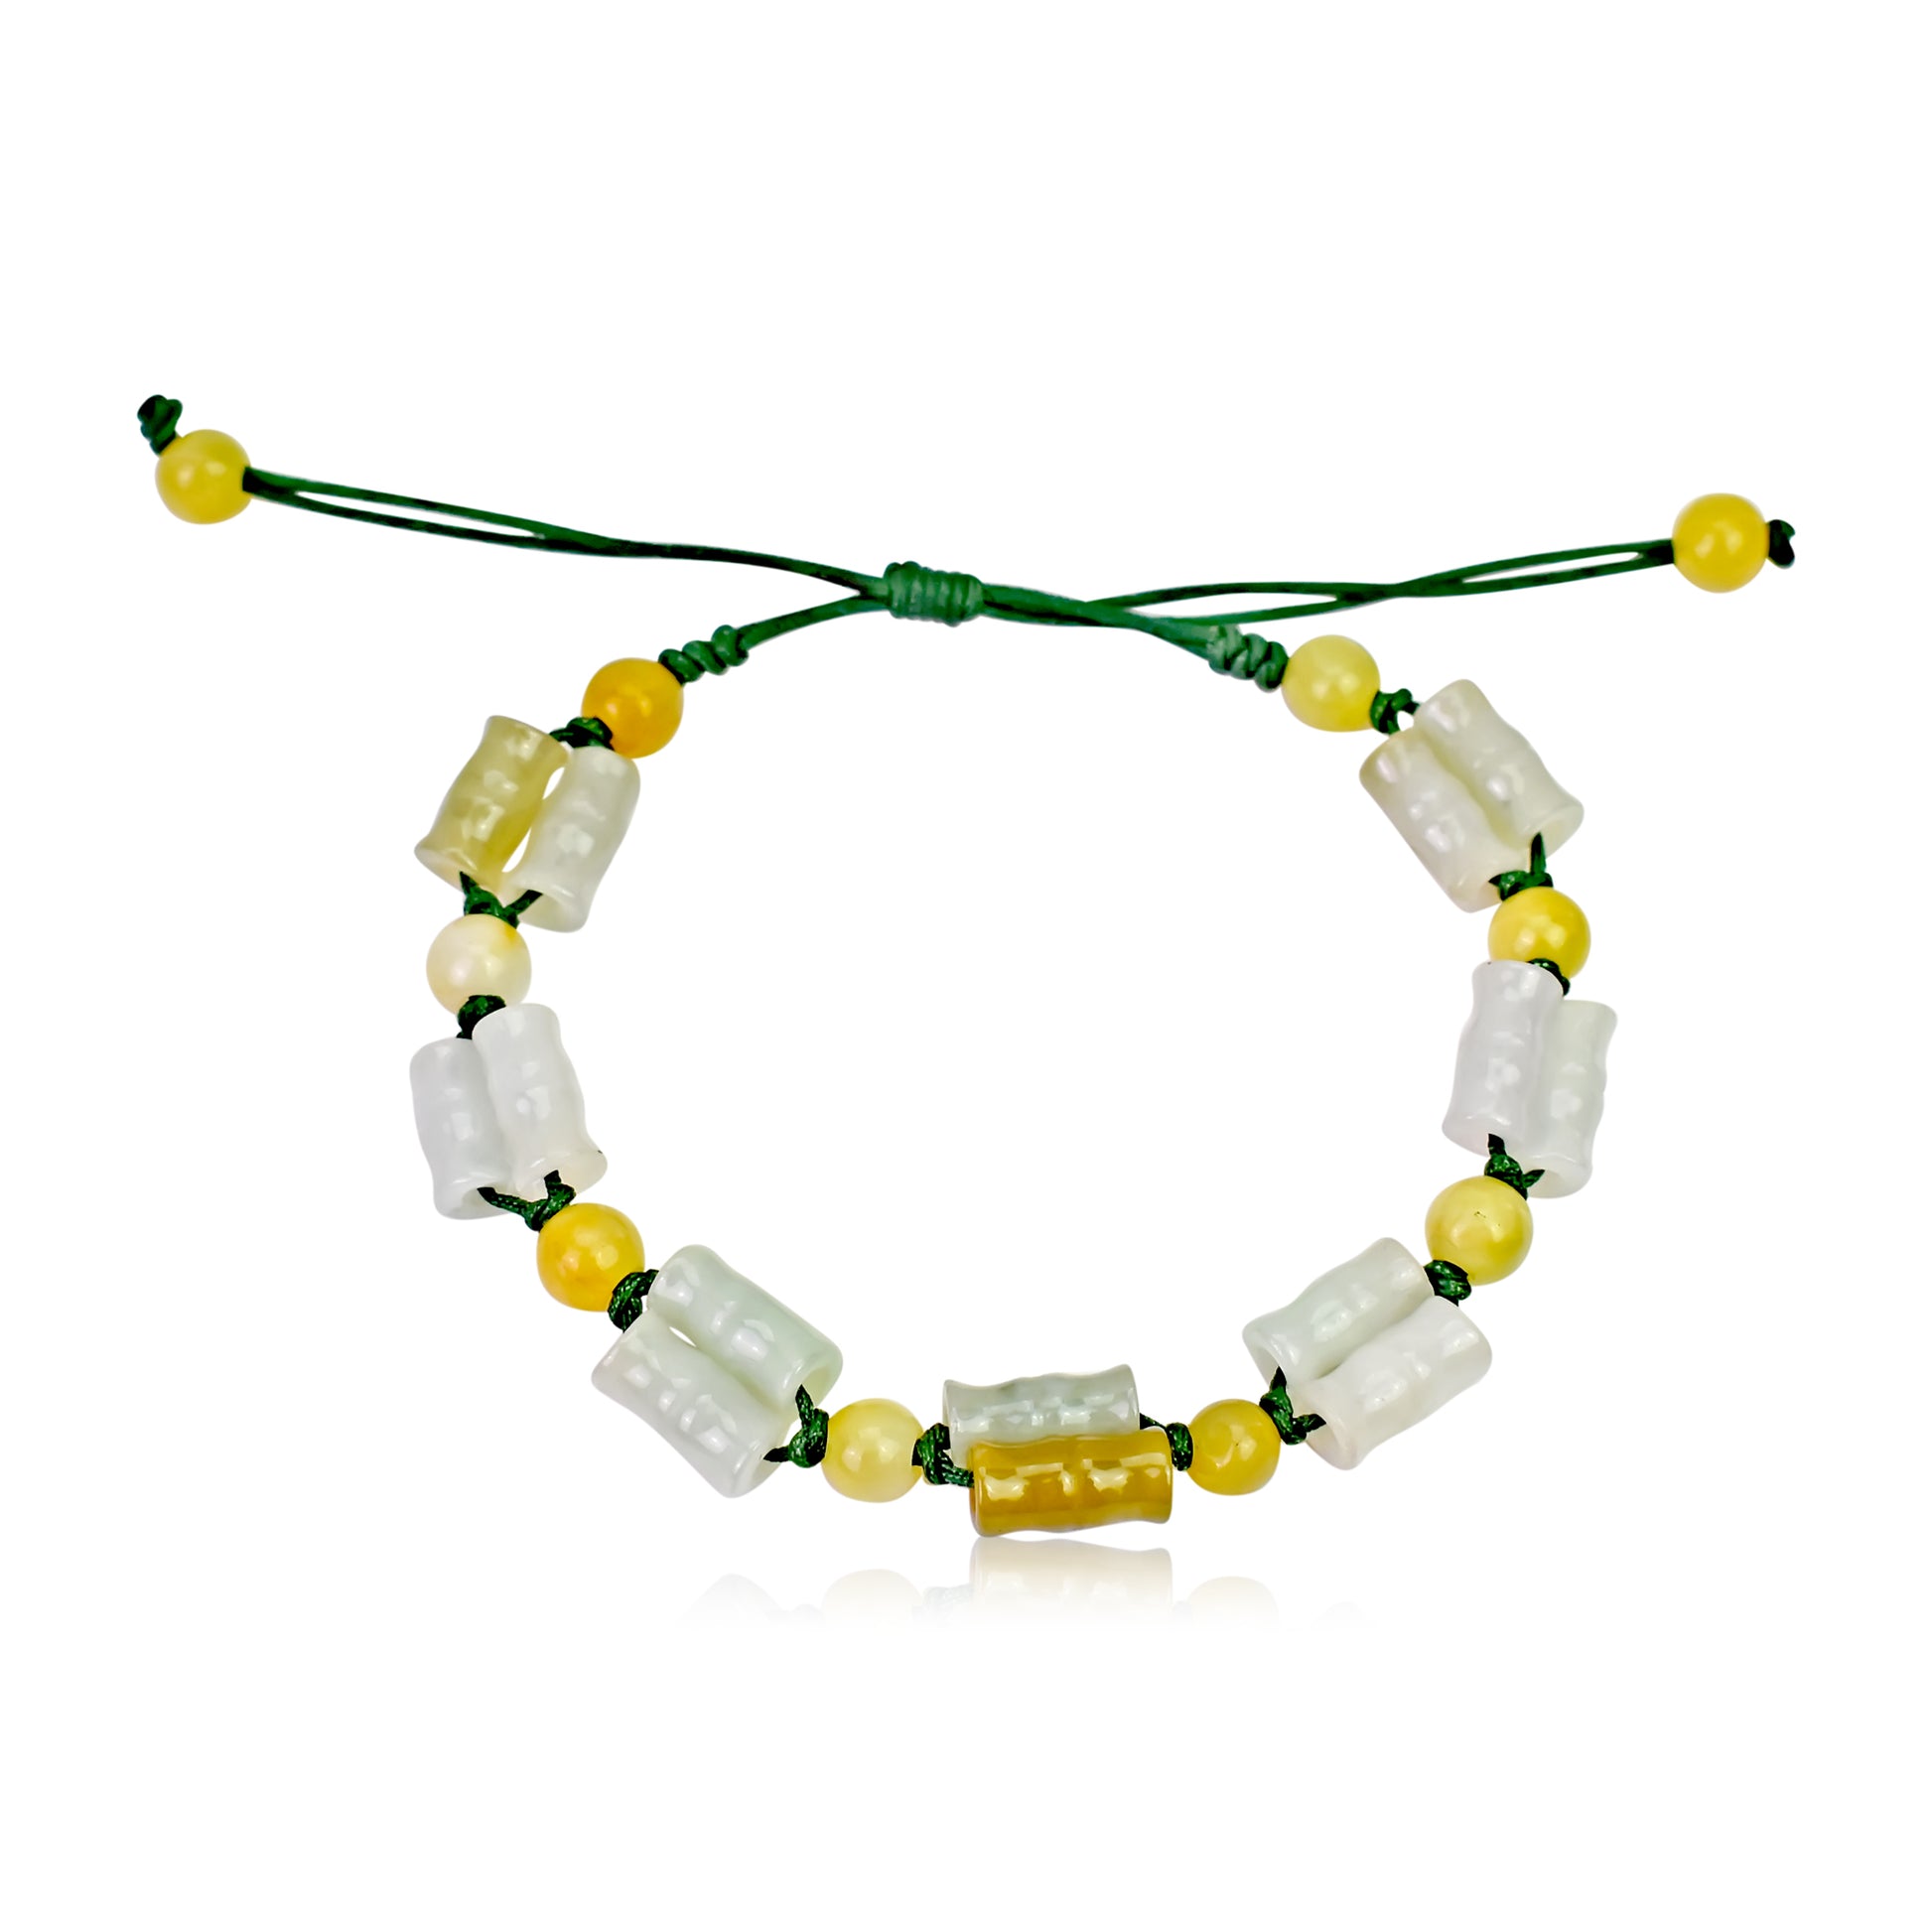 Add Elegance to Your Look with a Double Bamboo Handmade Jade Bracelet